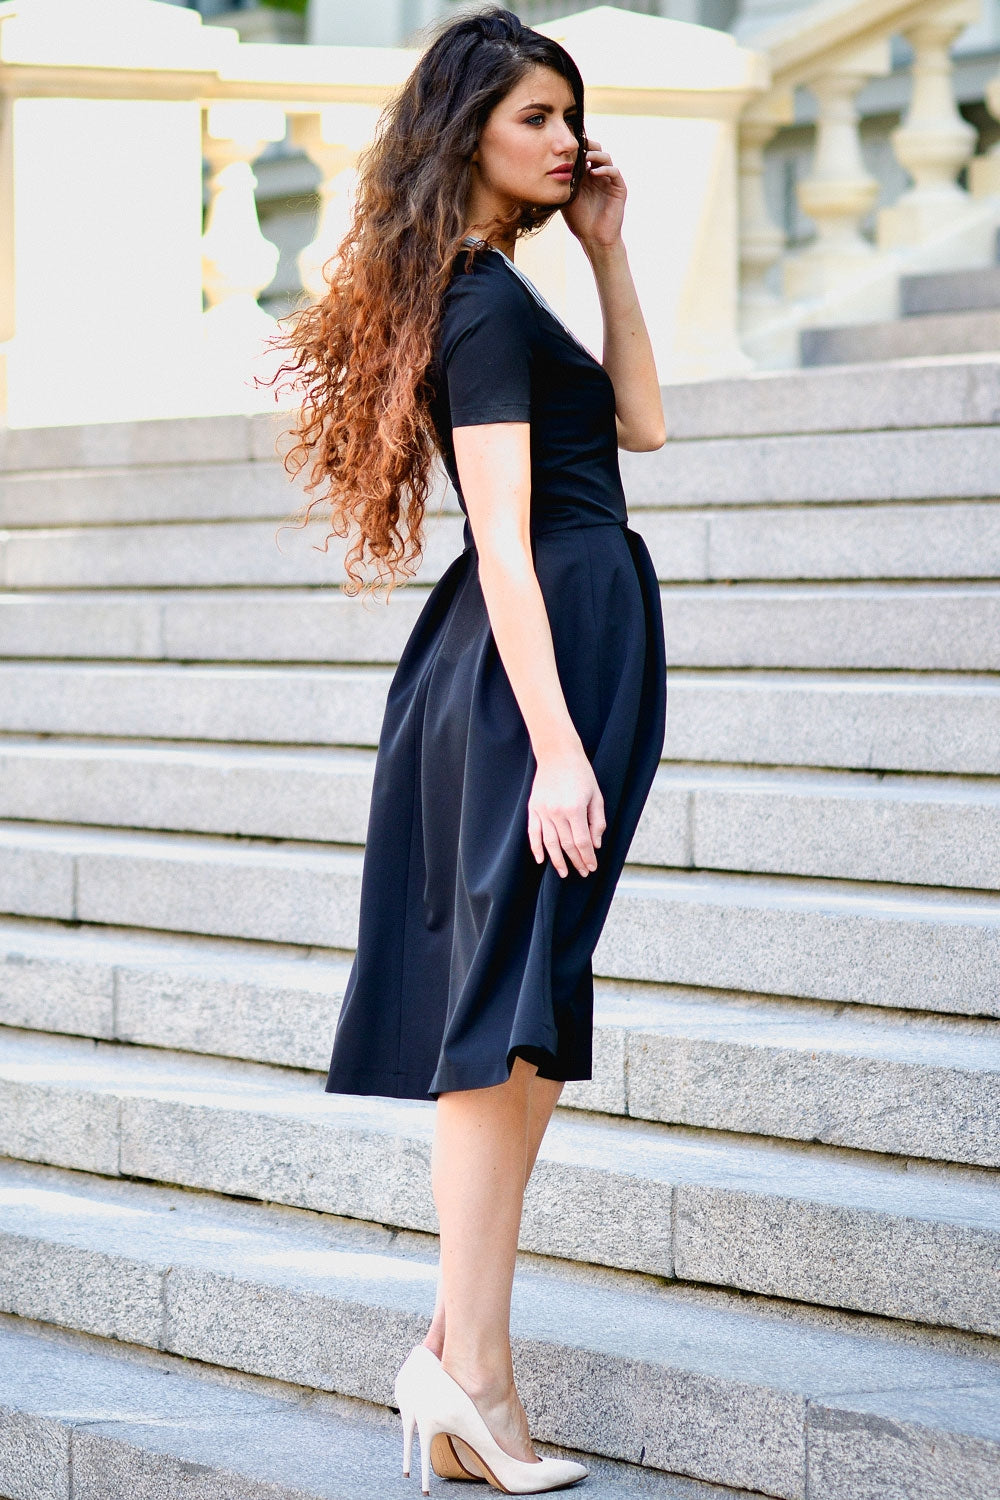 Black dress with pleats in skirt part